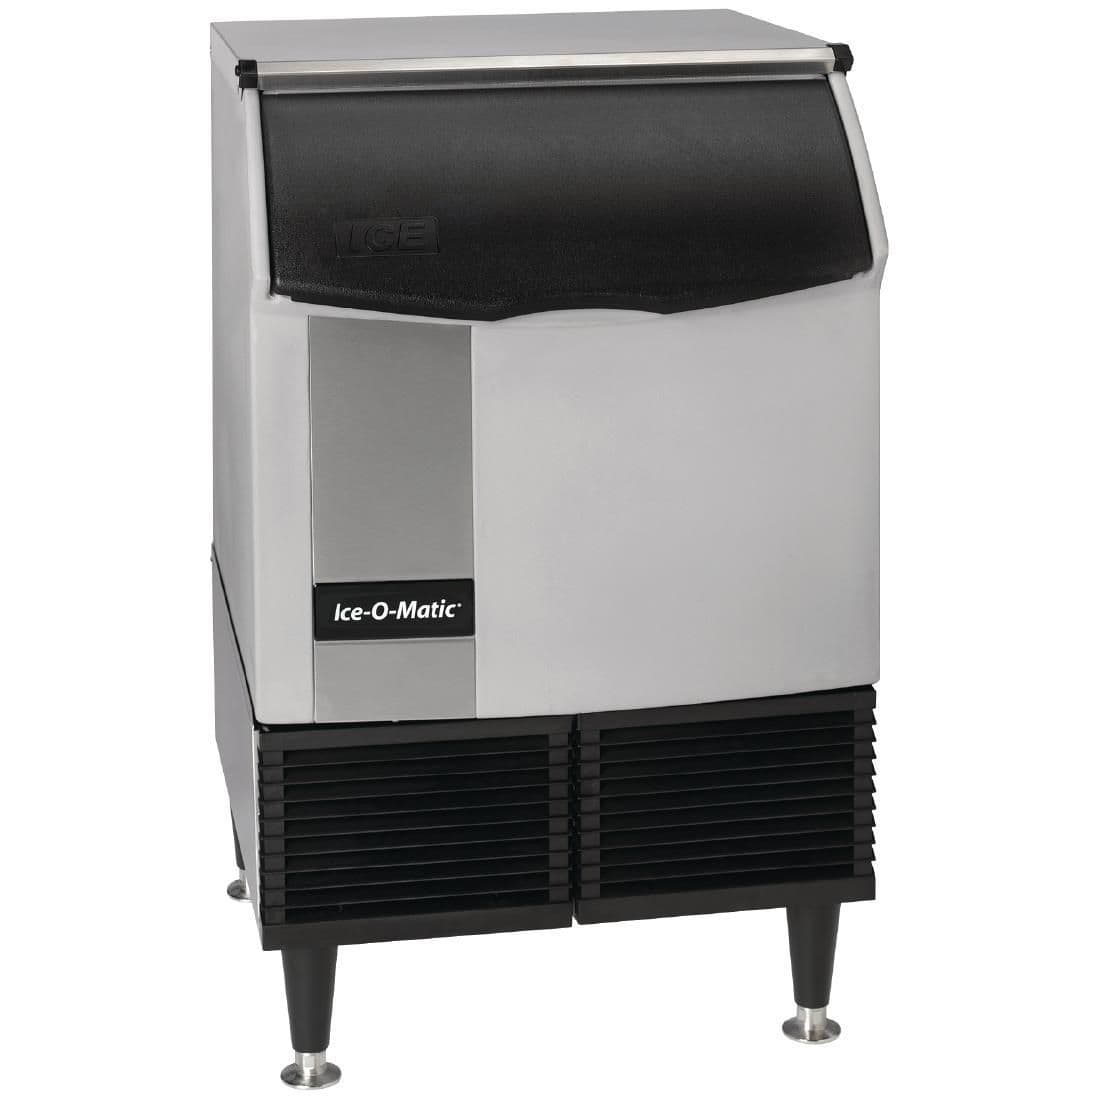 DL068 Ice-O-Matic Half Cube Ice Machine 96kg Output ICEU225H DL068 JD Catering Equipment Solutions Ltd